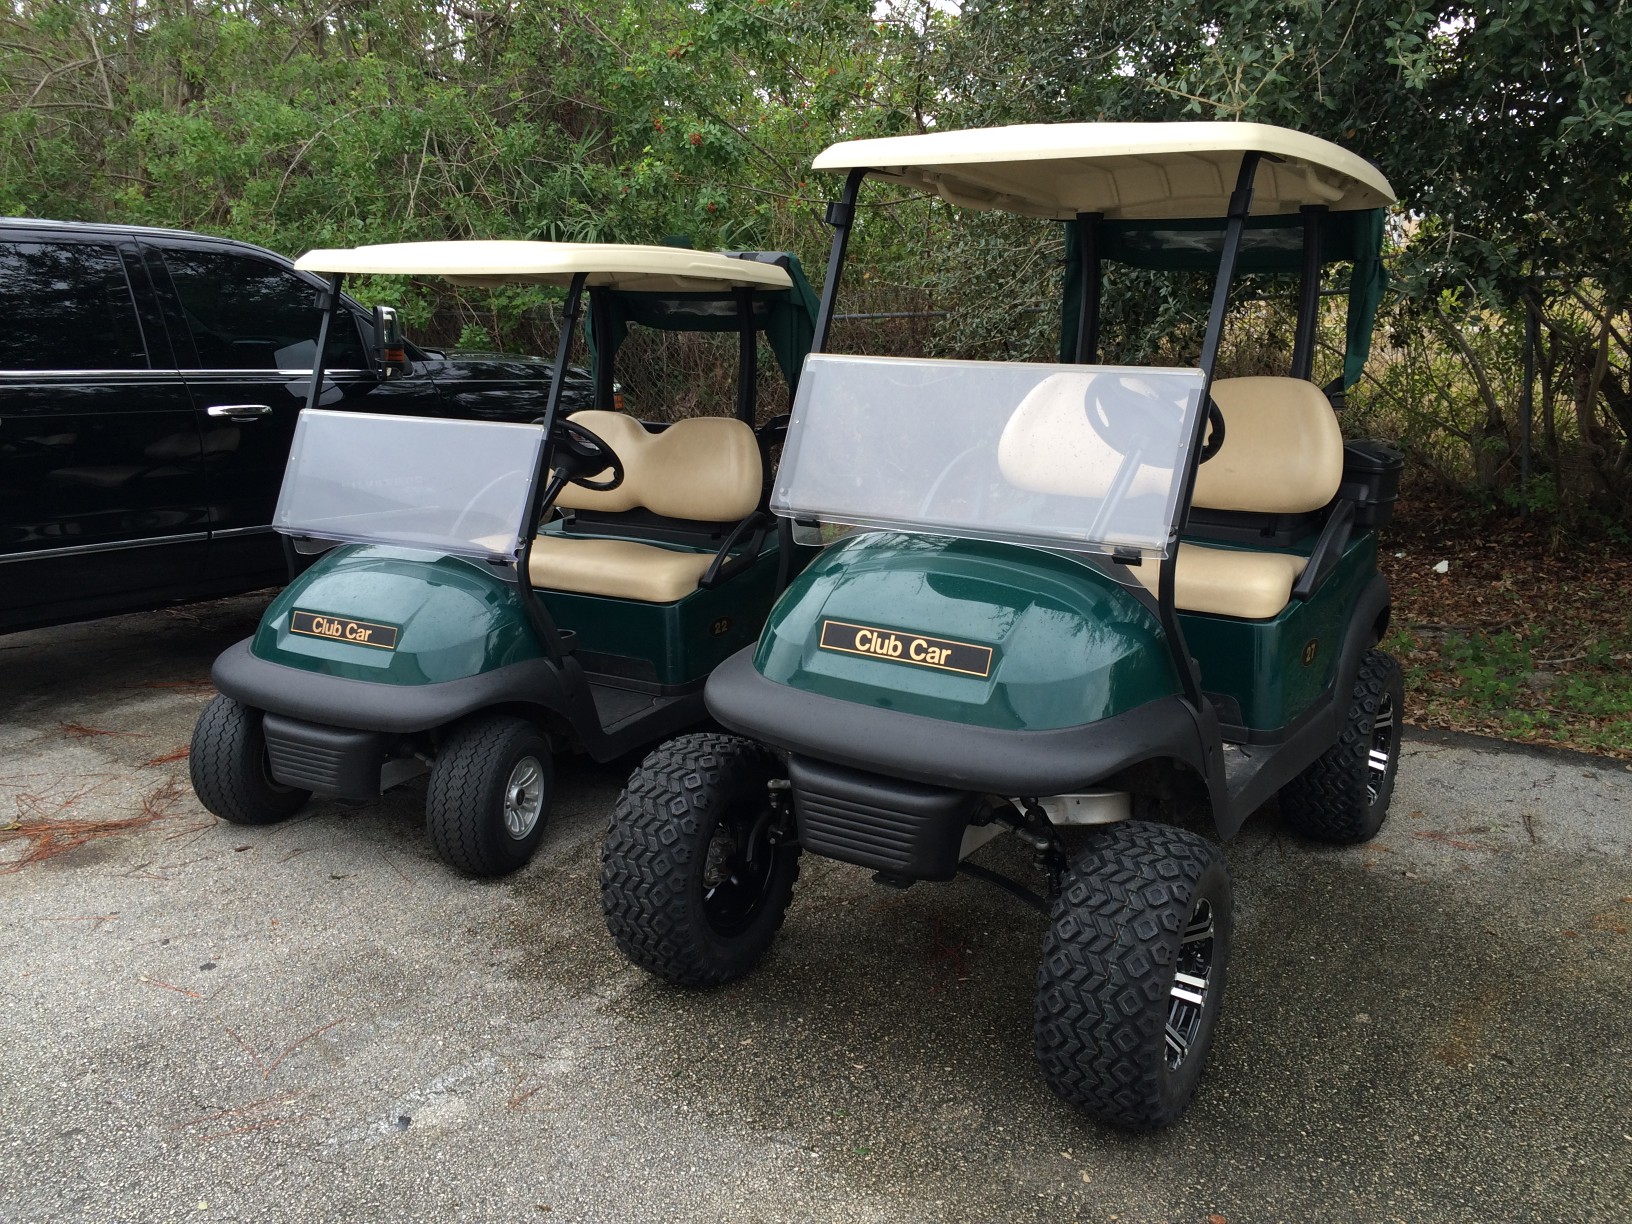 Petes Golf Cart Buying Guide